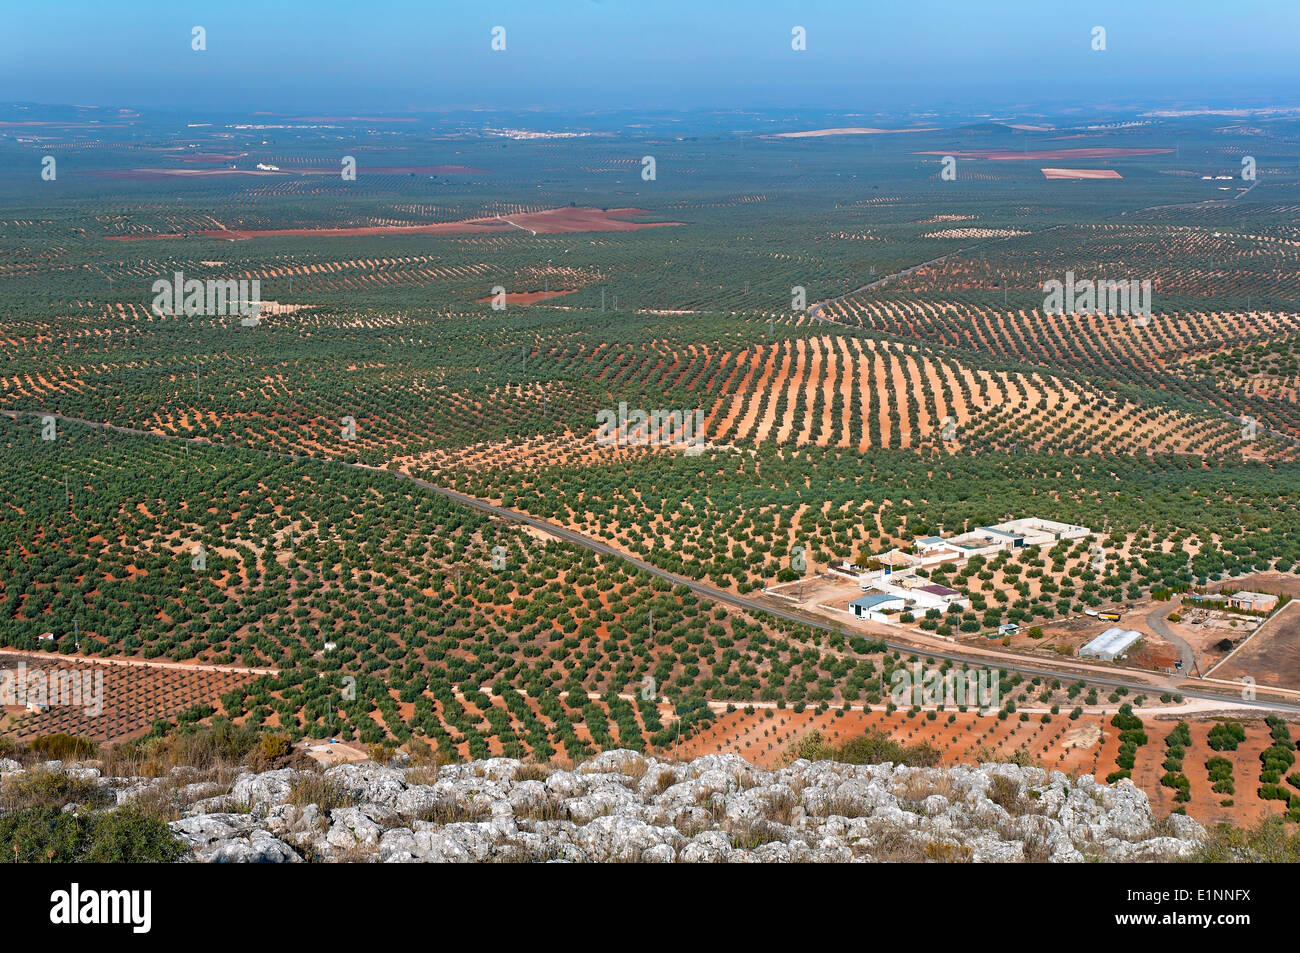 Landscape of olive grove, The Tourist Route of the Bandits, Alameda, Malaga province, Region of Andalusia, Spain, Europe Stock Photo